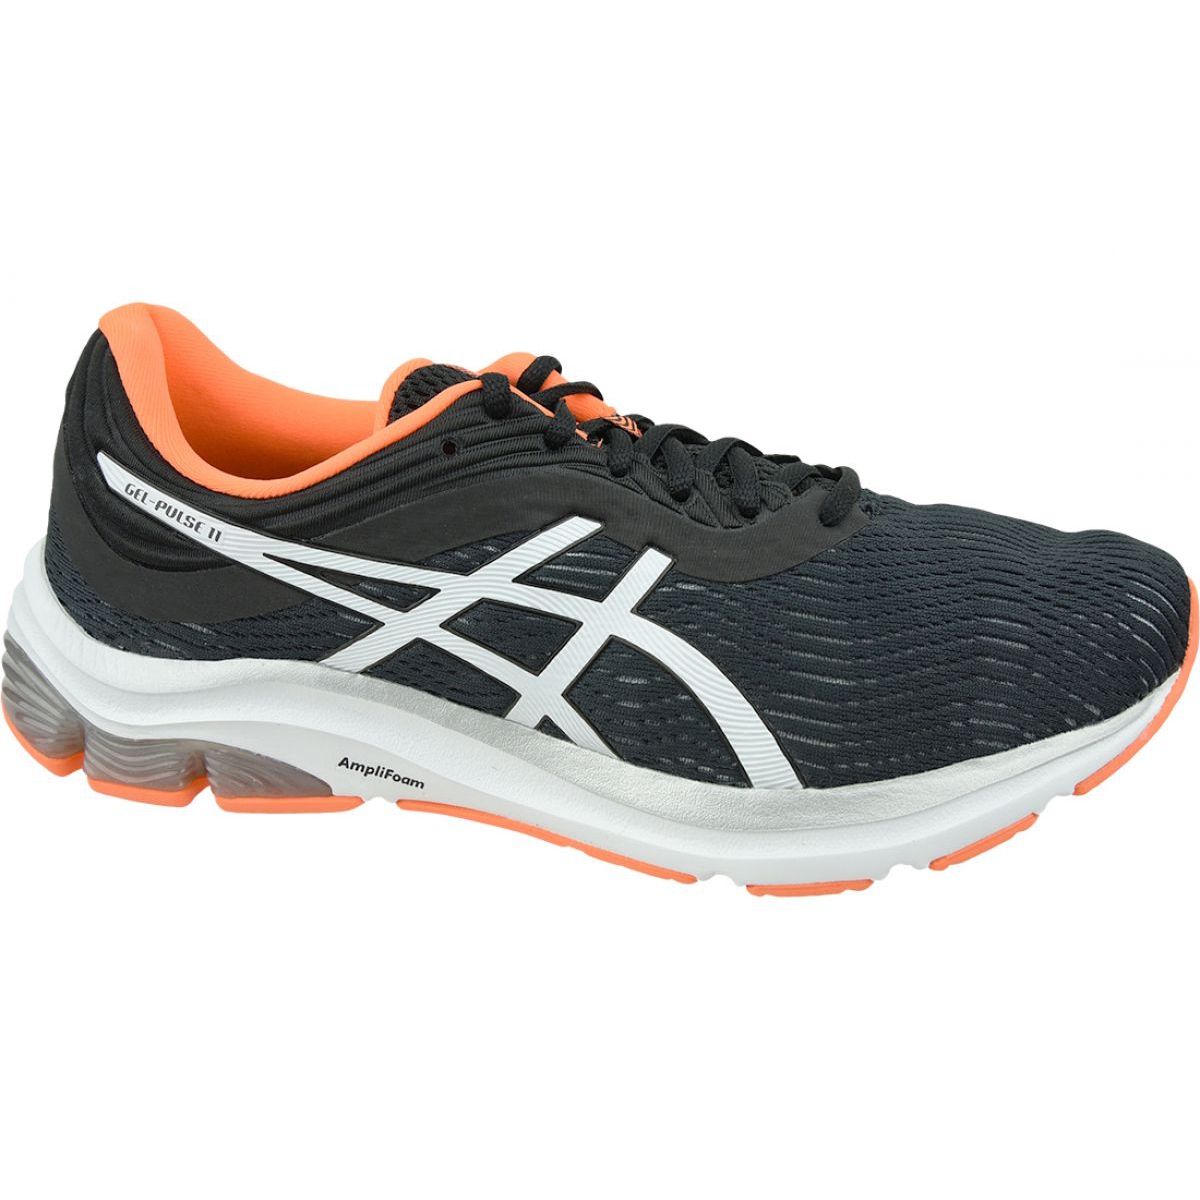 1011a550 asics,Save up to 18%,www.ilcascinone.com